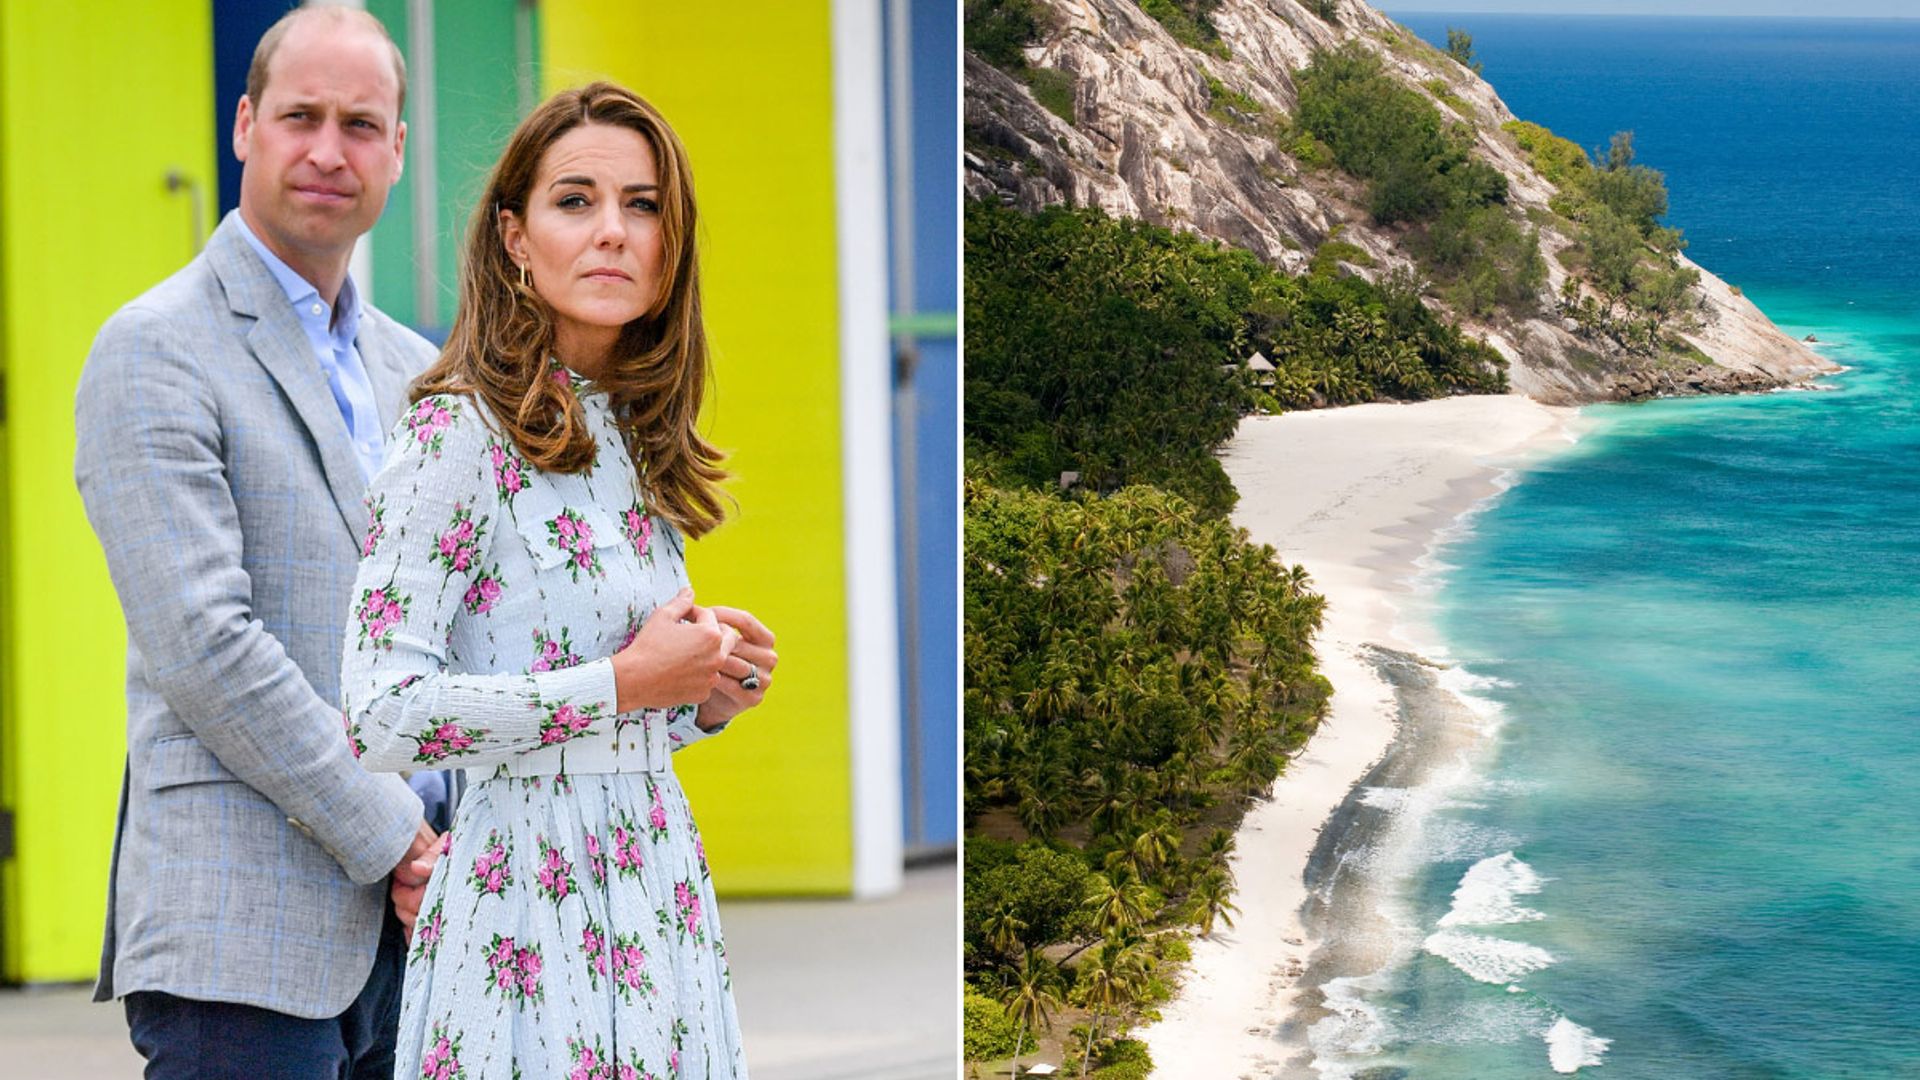 Why Prince William and Kate Middleton's exotic honeymoon broke tradition